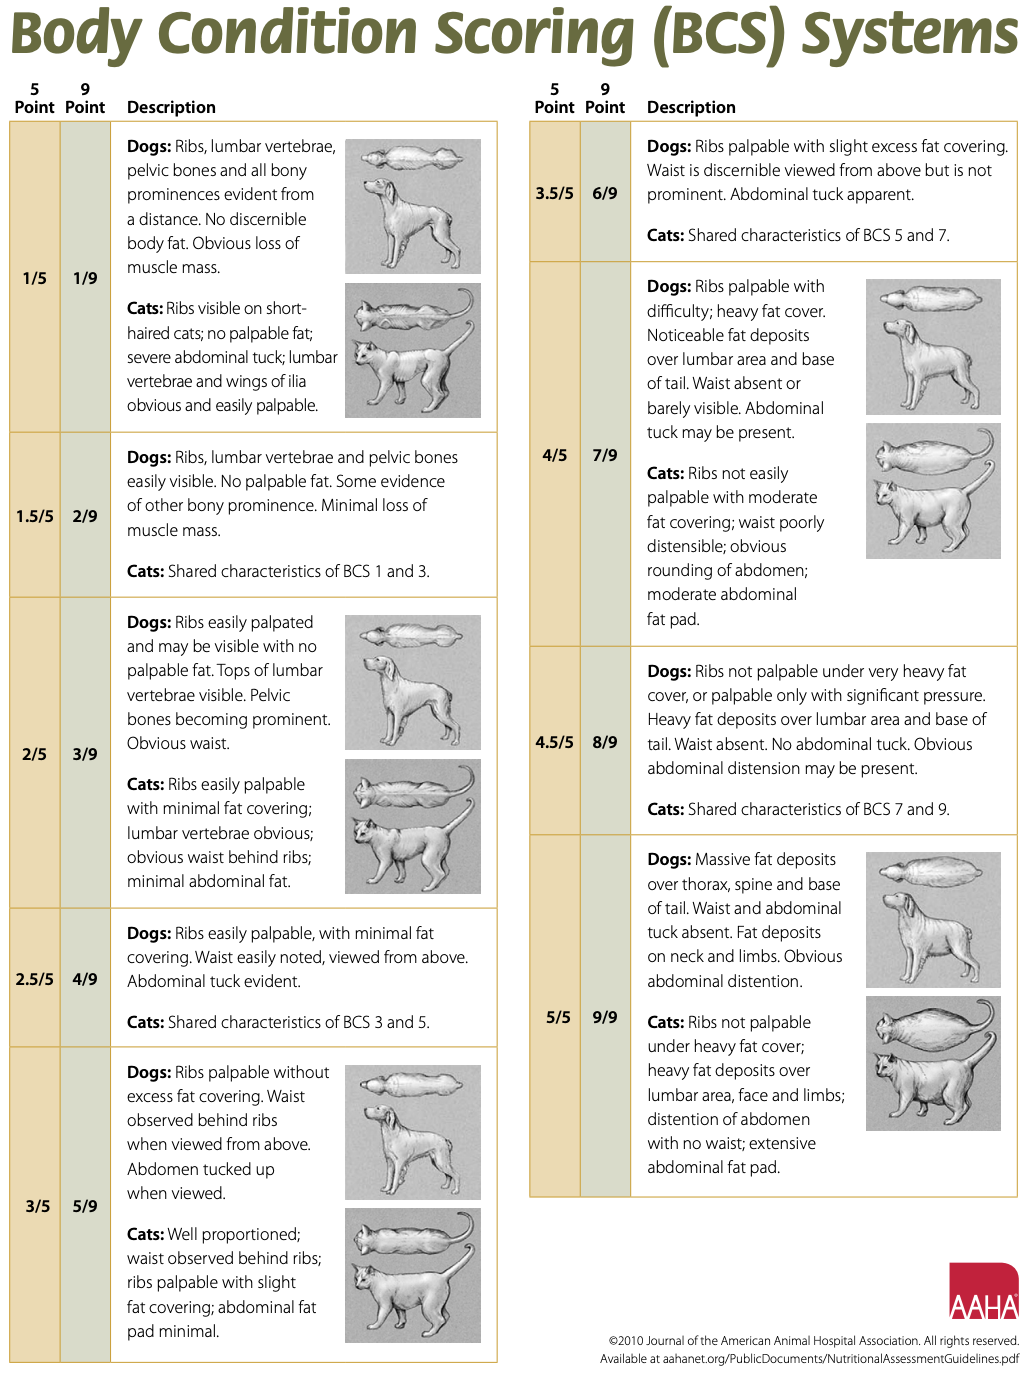 Body Condition Scoring Systems for Dogs and Cats - AAHA